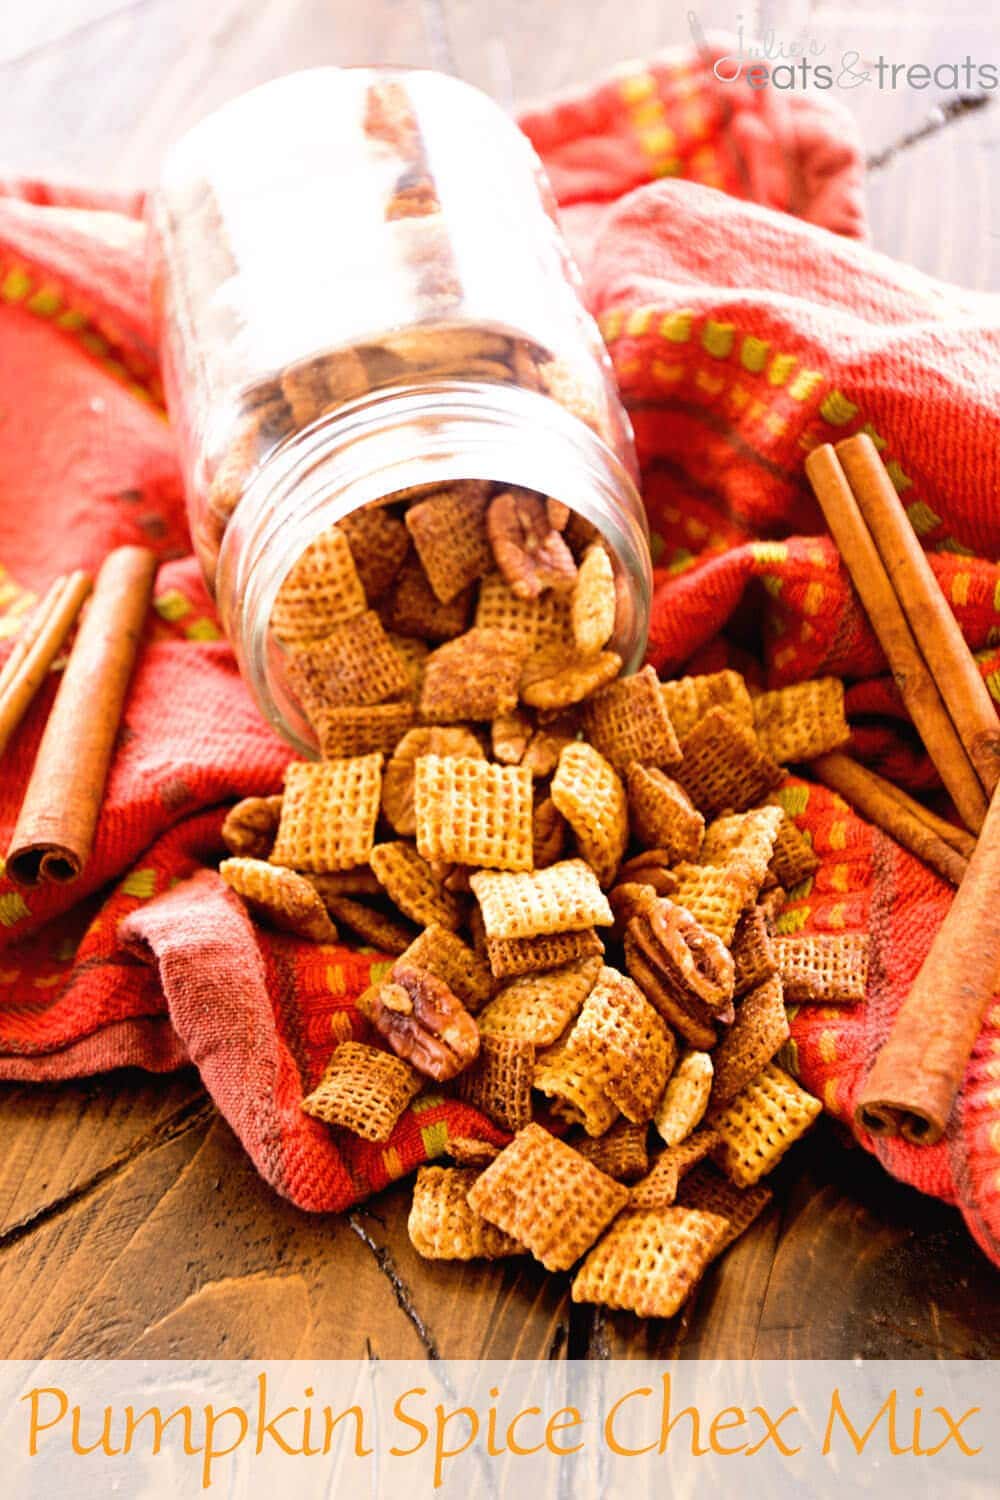 Pumpkin Chex Mix Recipe ~ Butter, Brown Sugar and Spice Make a Quick, Easy Sweet and Crunchy Chex Mix! Plus Make it in Your Microwave!